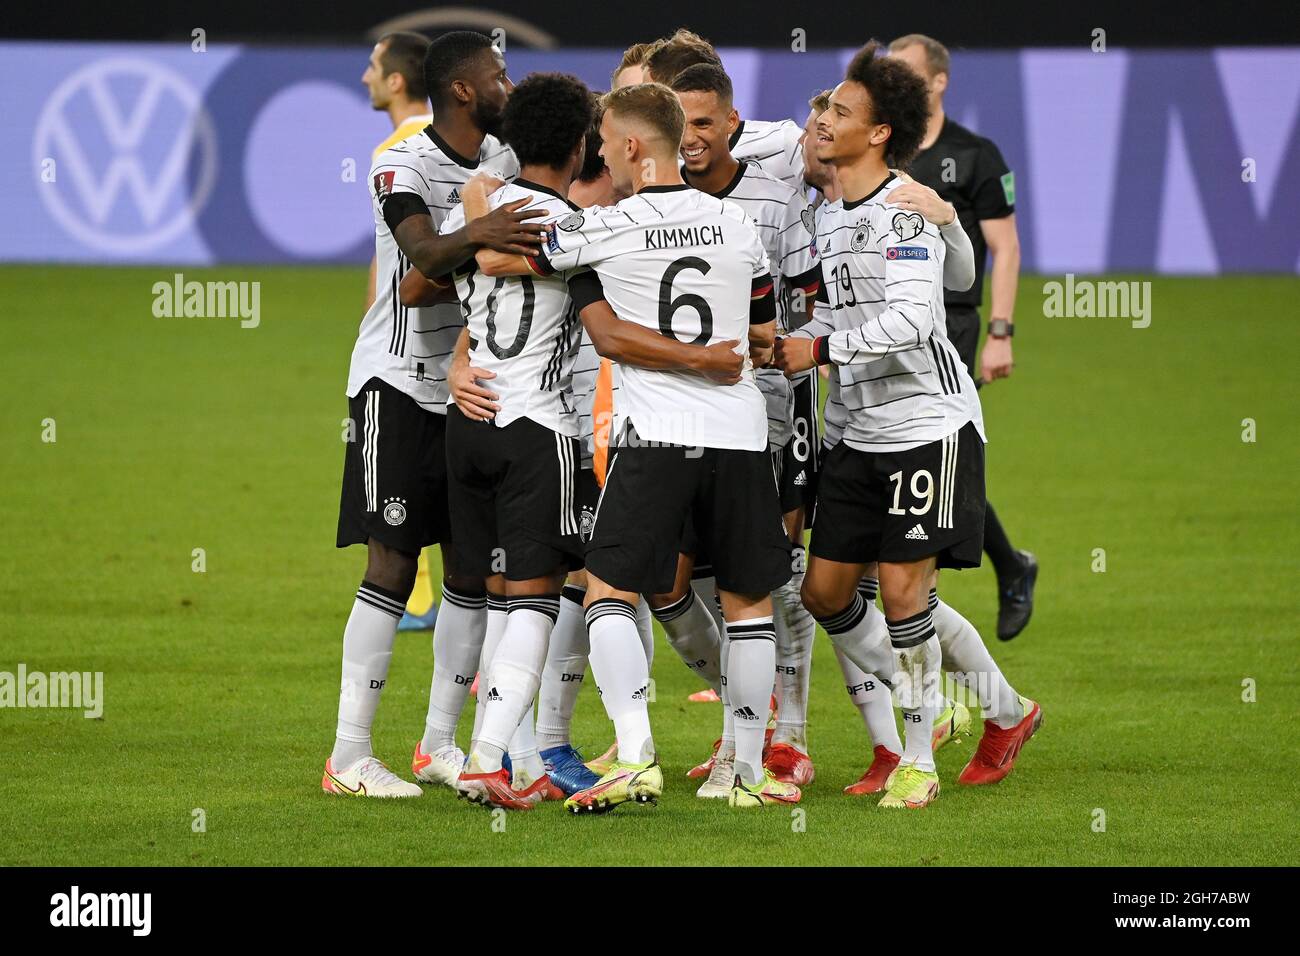 Stuttgart Germany 6th Sep 21 Players Of Germany Celebrate After Scoring During The Fifa World Cup Qatar 22 European Qualifiers Group J Football Match Between Germany And Armenia In Stuttgart Germany Sept